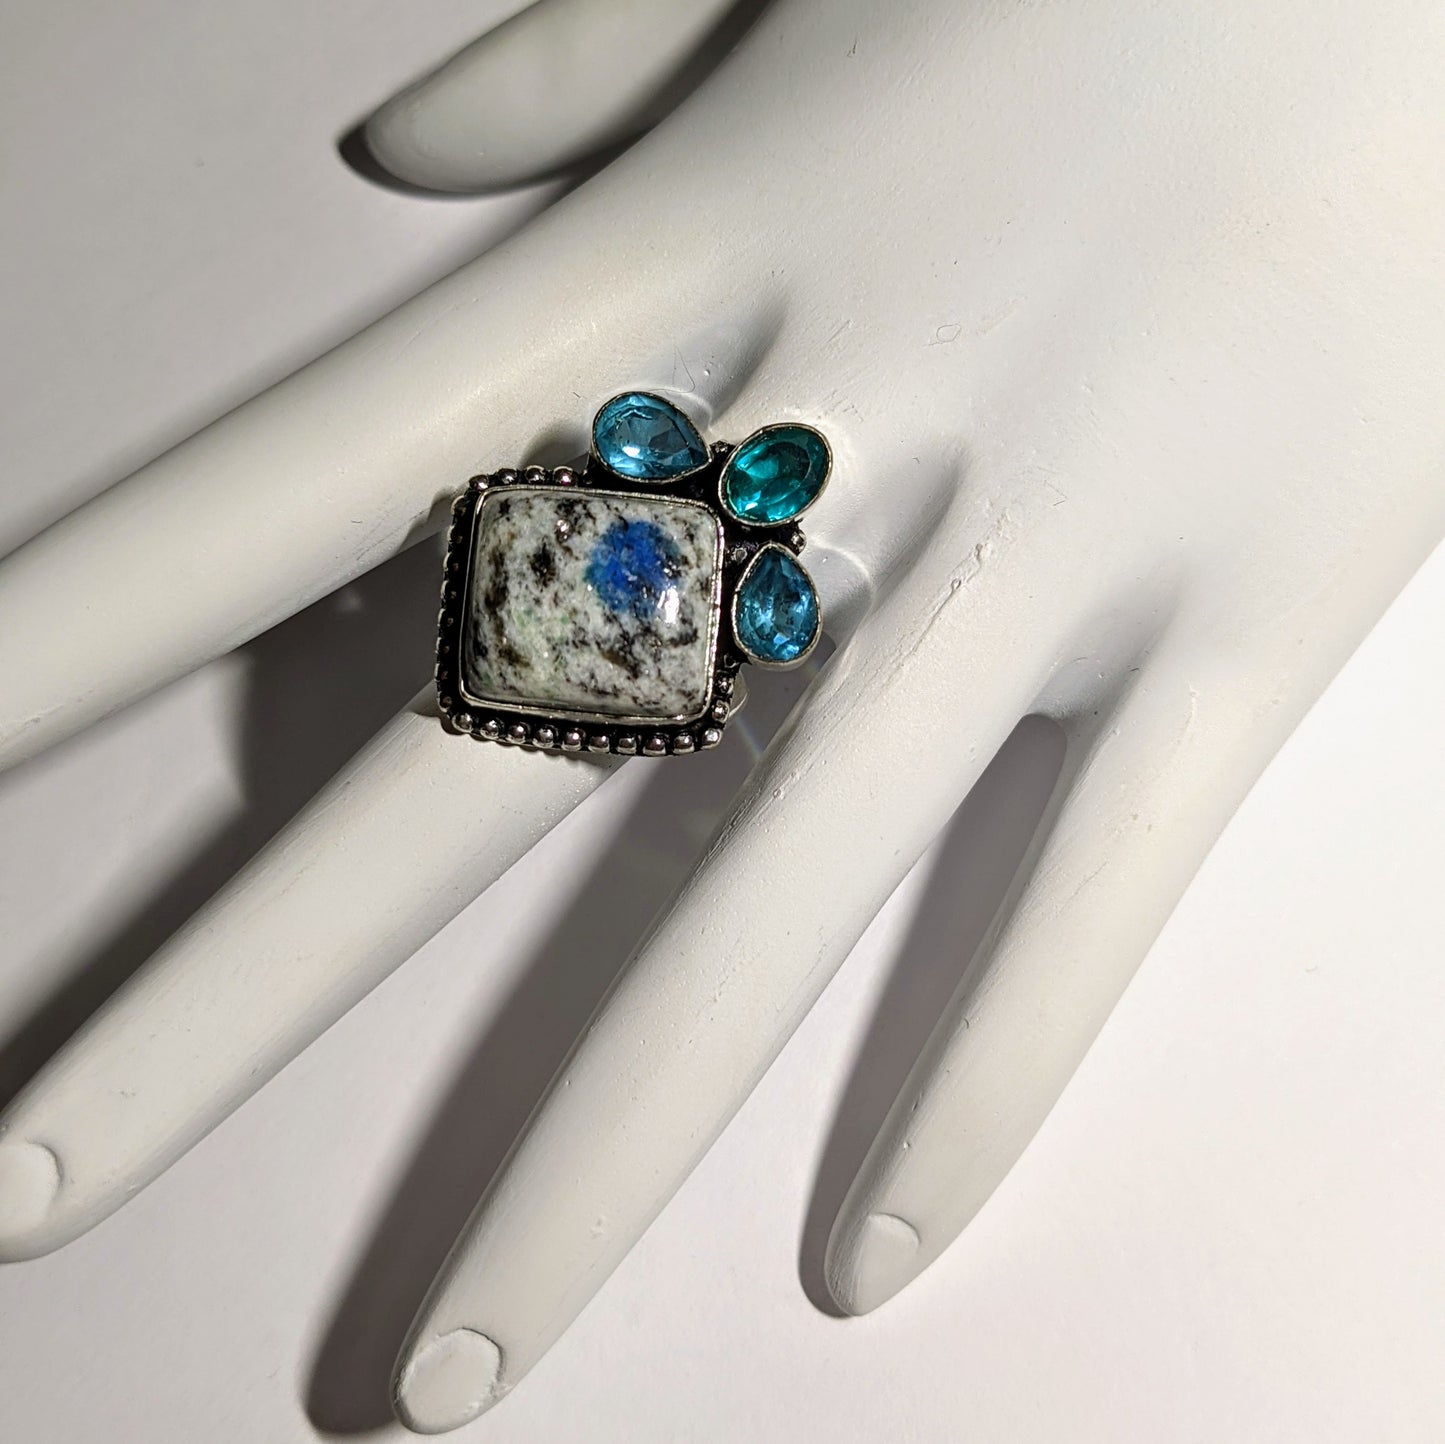 ETHNIC STYLE K2, AZURITE, AND BLUE TOPAZ RING IN STERLING SILVER-RINGS-Jipsi Junk-JipsiJunk